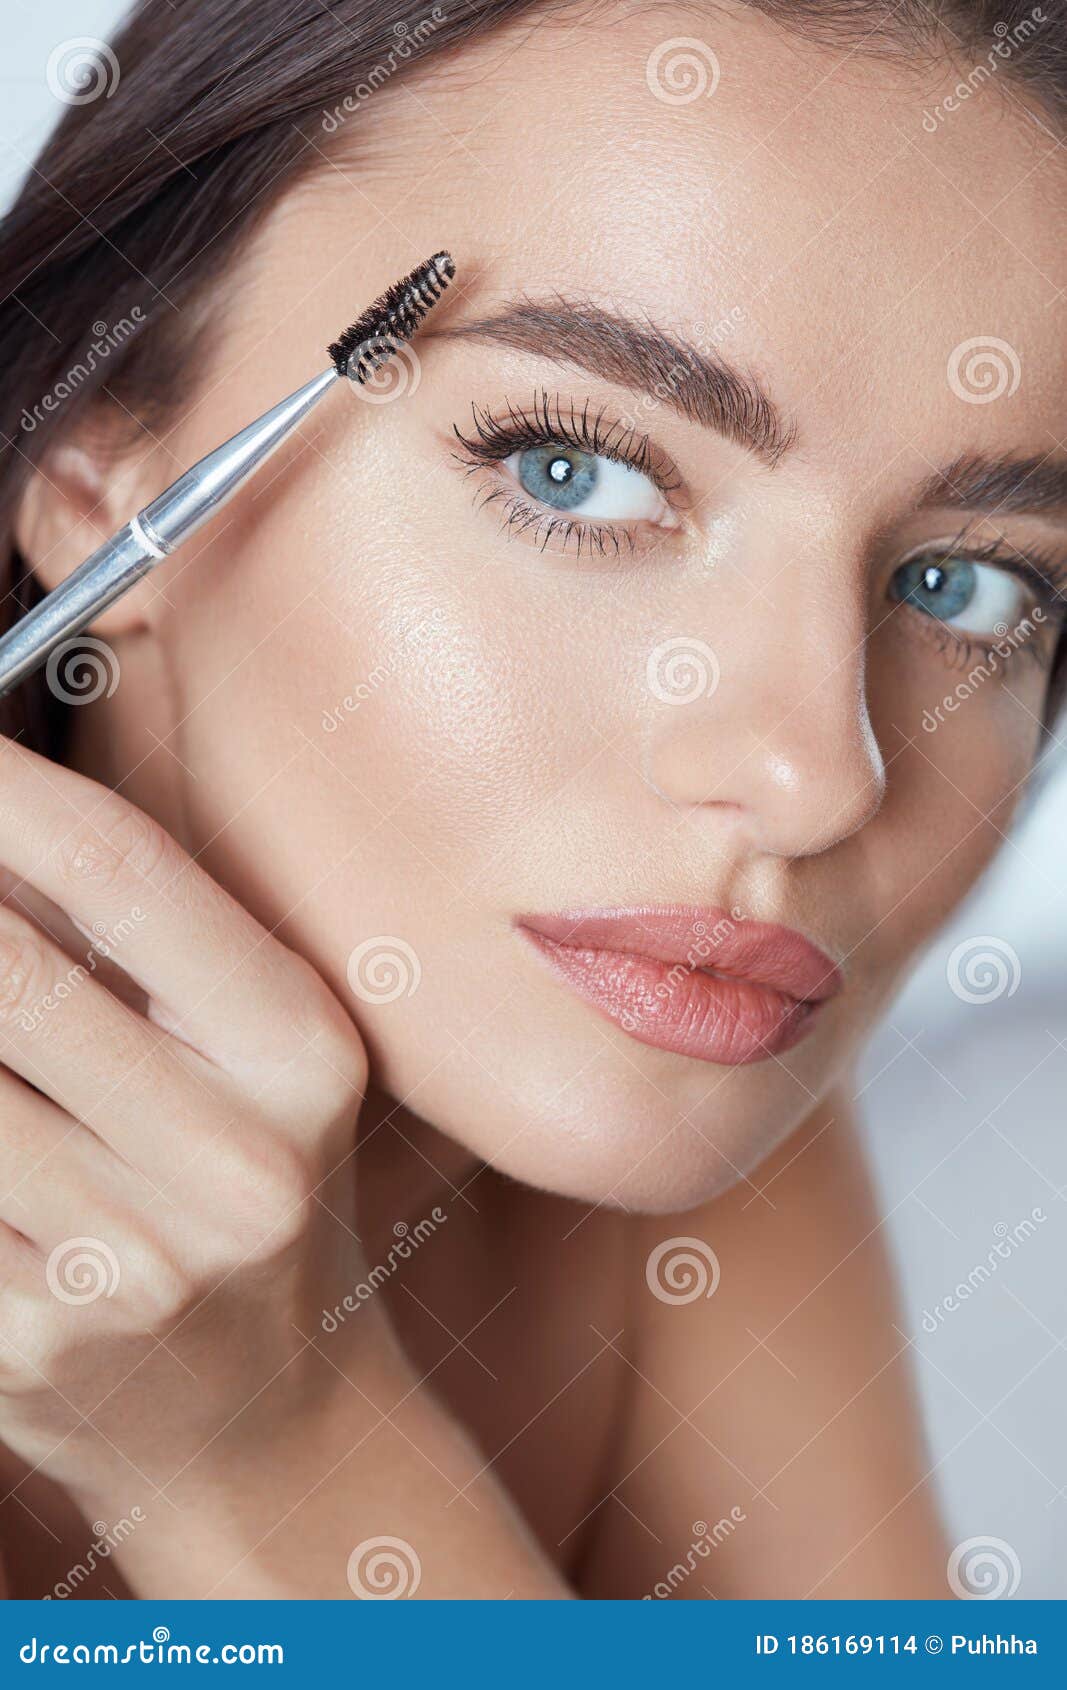 eyebrow makeup. woman brushing brows with brush. beautiful girl with blue eyes and perfect skin